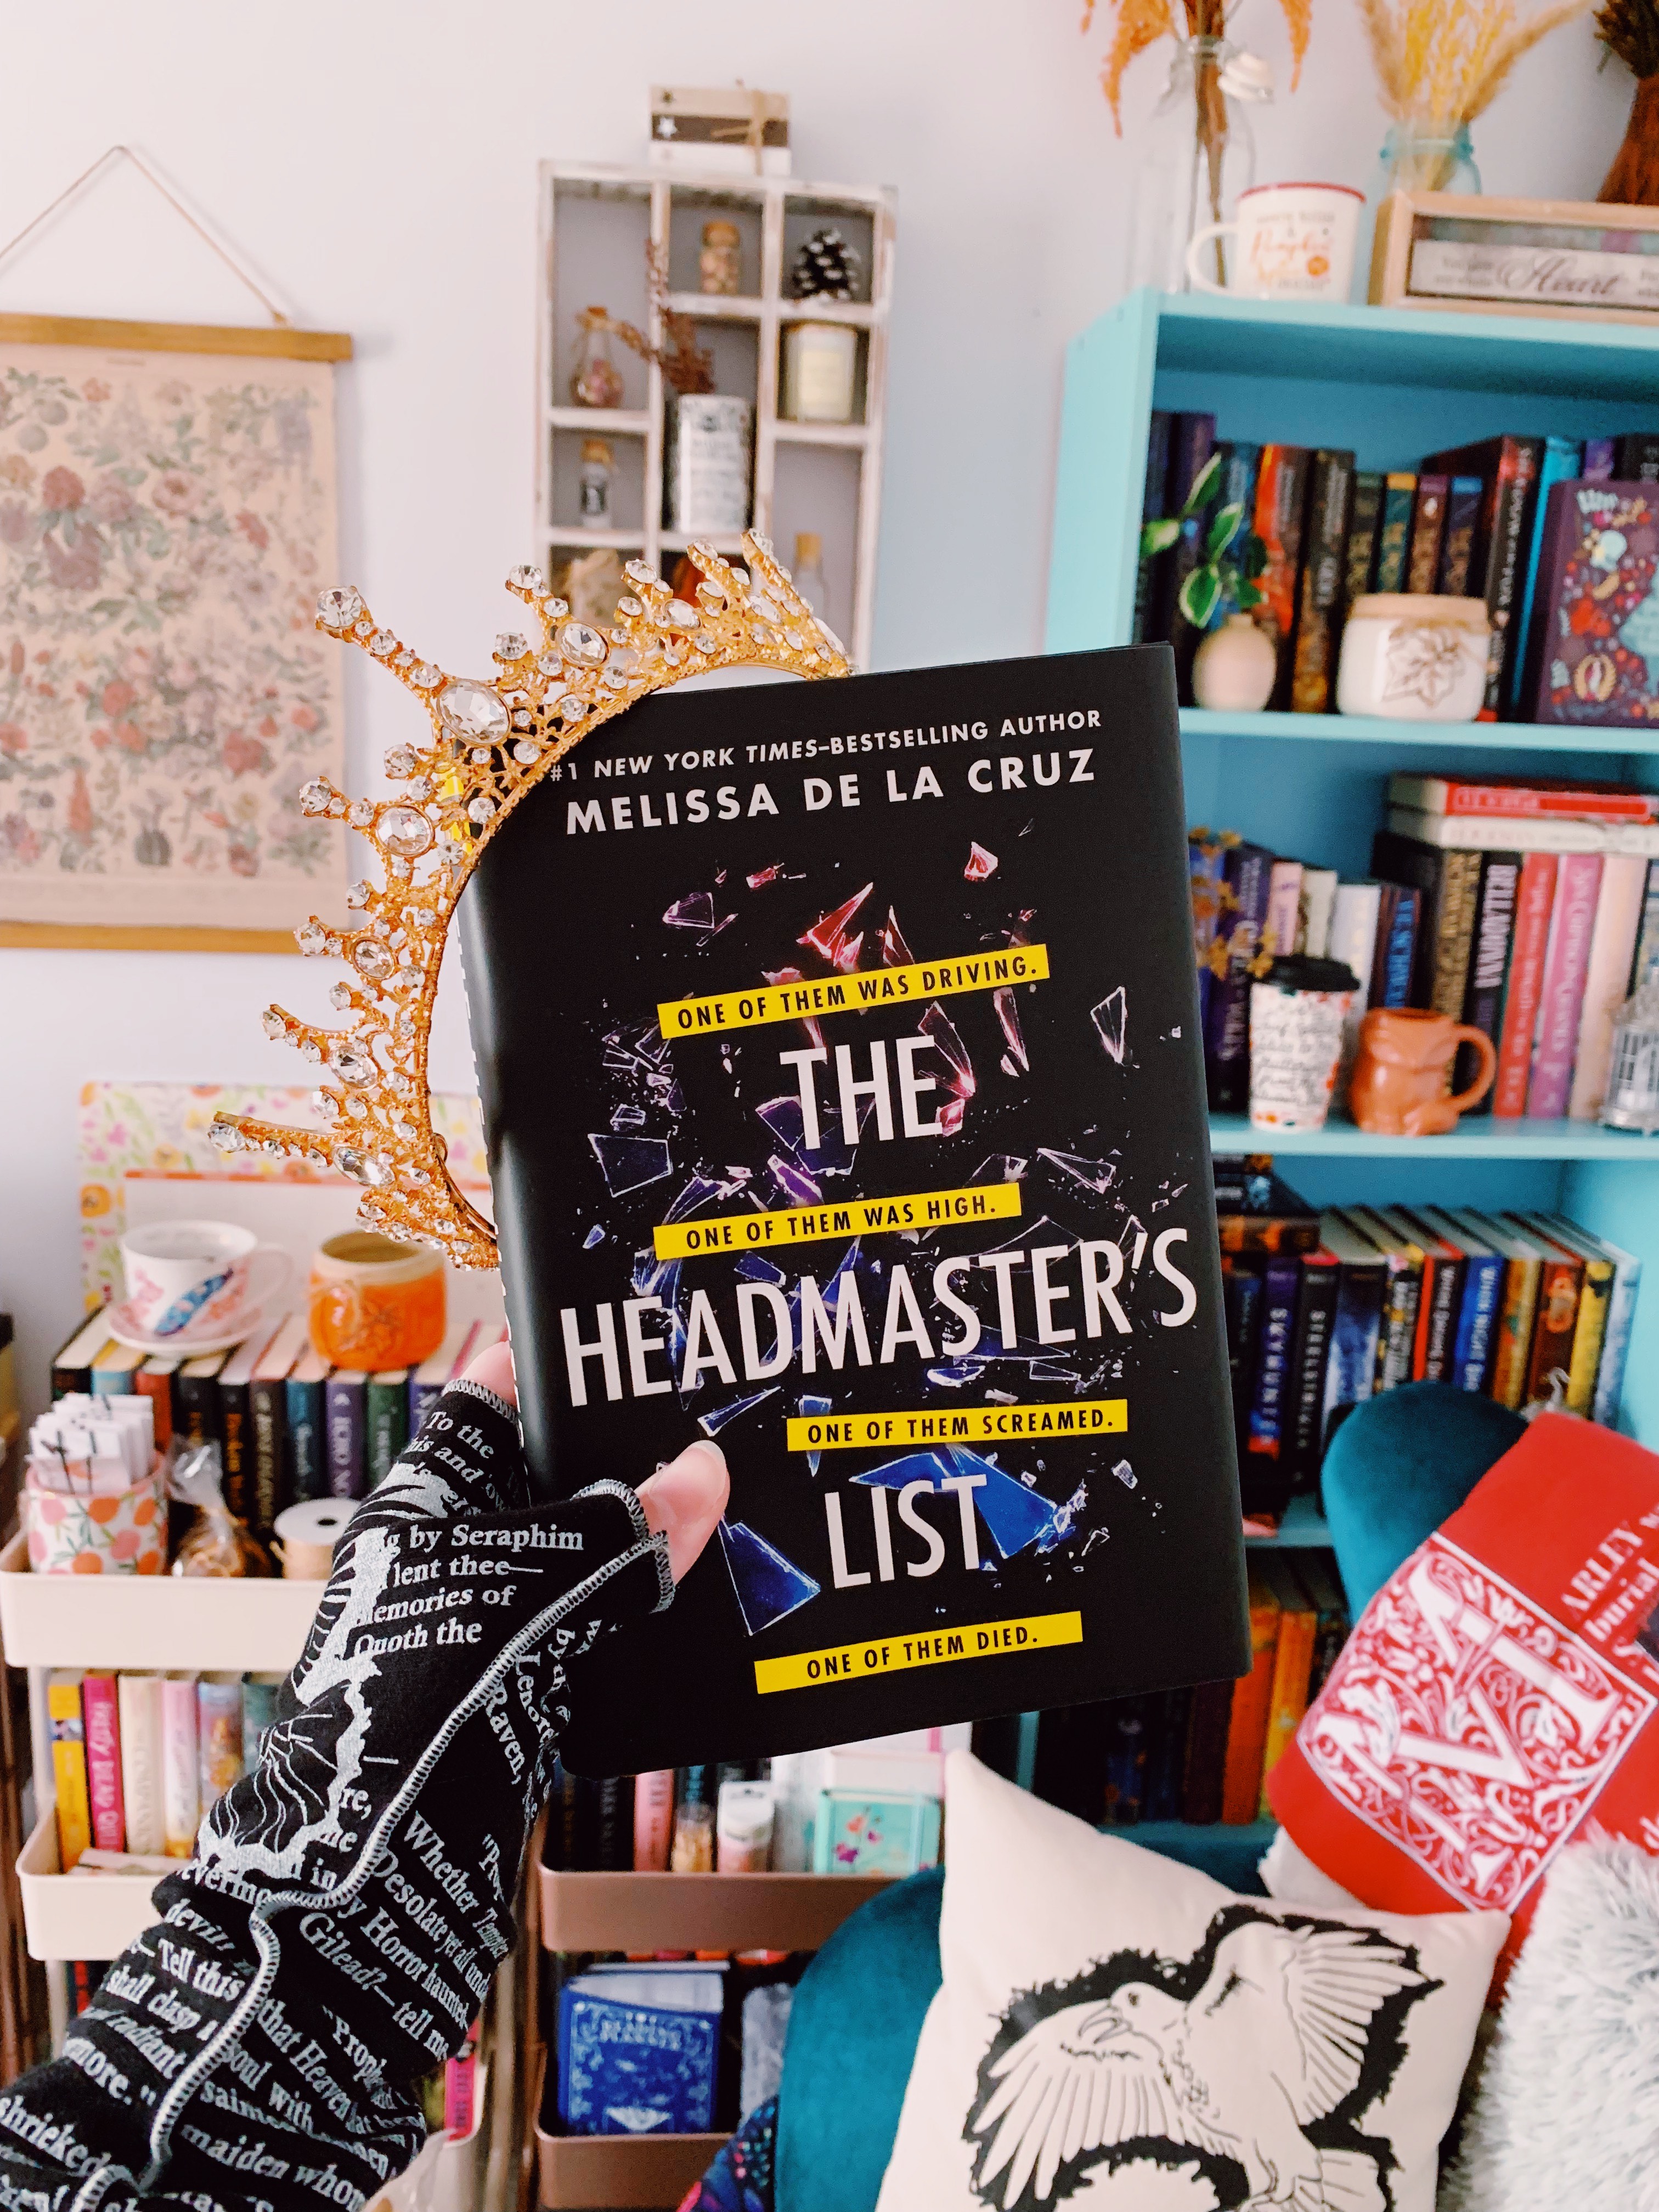 A hardcover copy of The Headmaster's List held in front of a blue bookshelf.